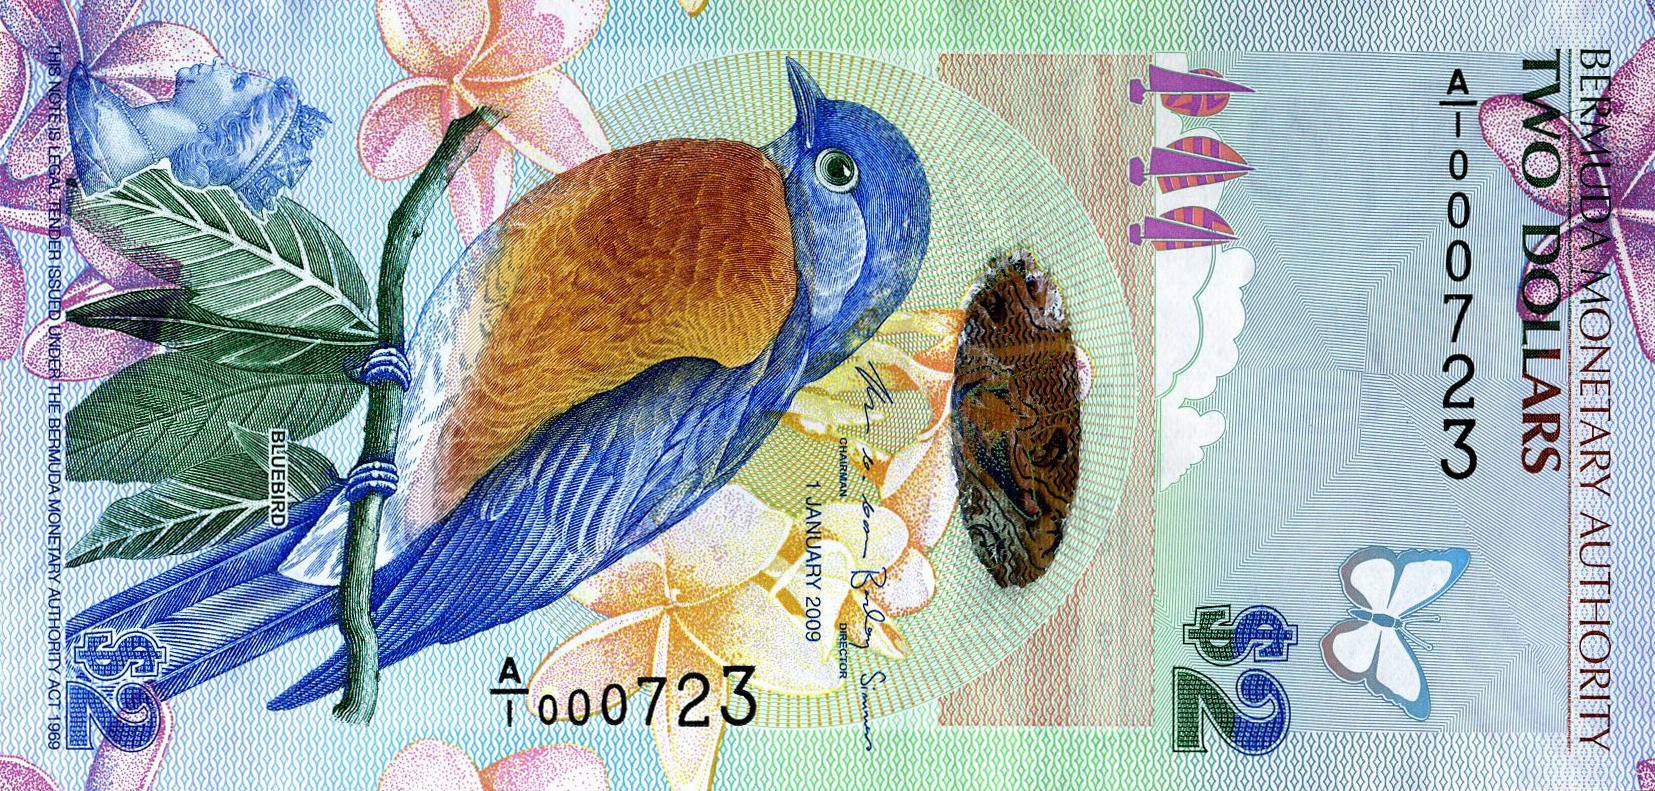 Bermuda 2-dollar note (B230a) named IBNS Banknote of the Year